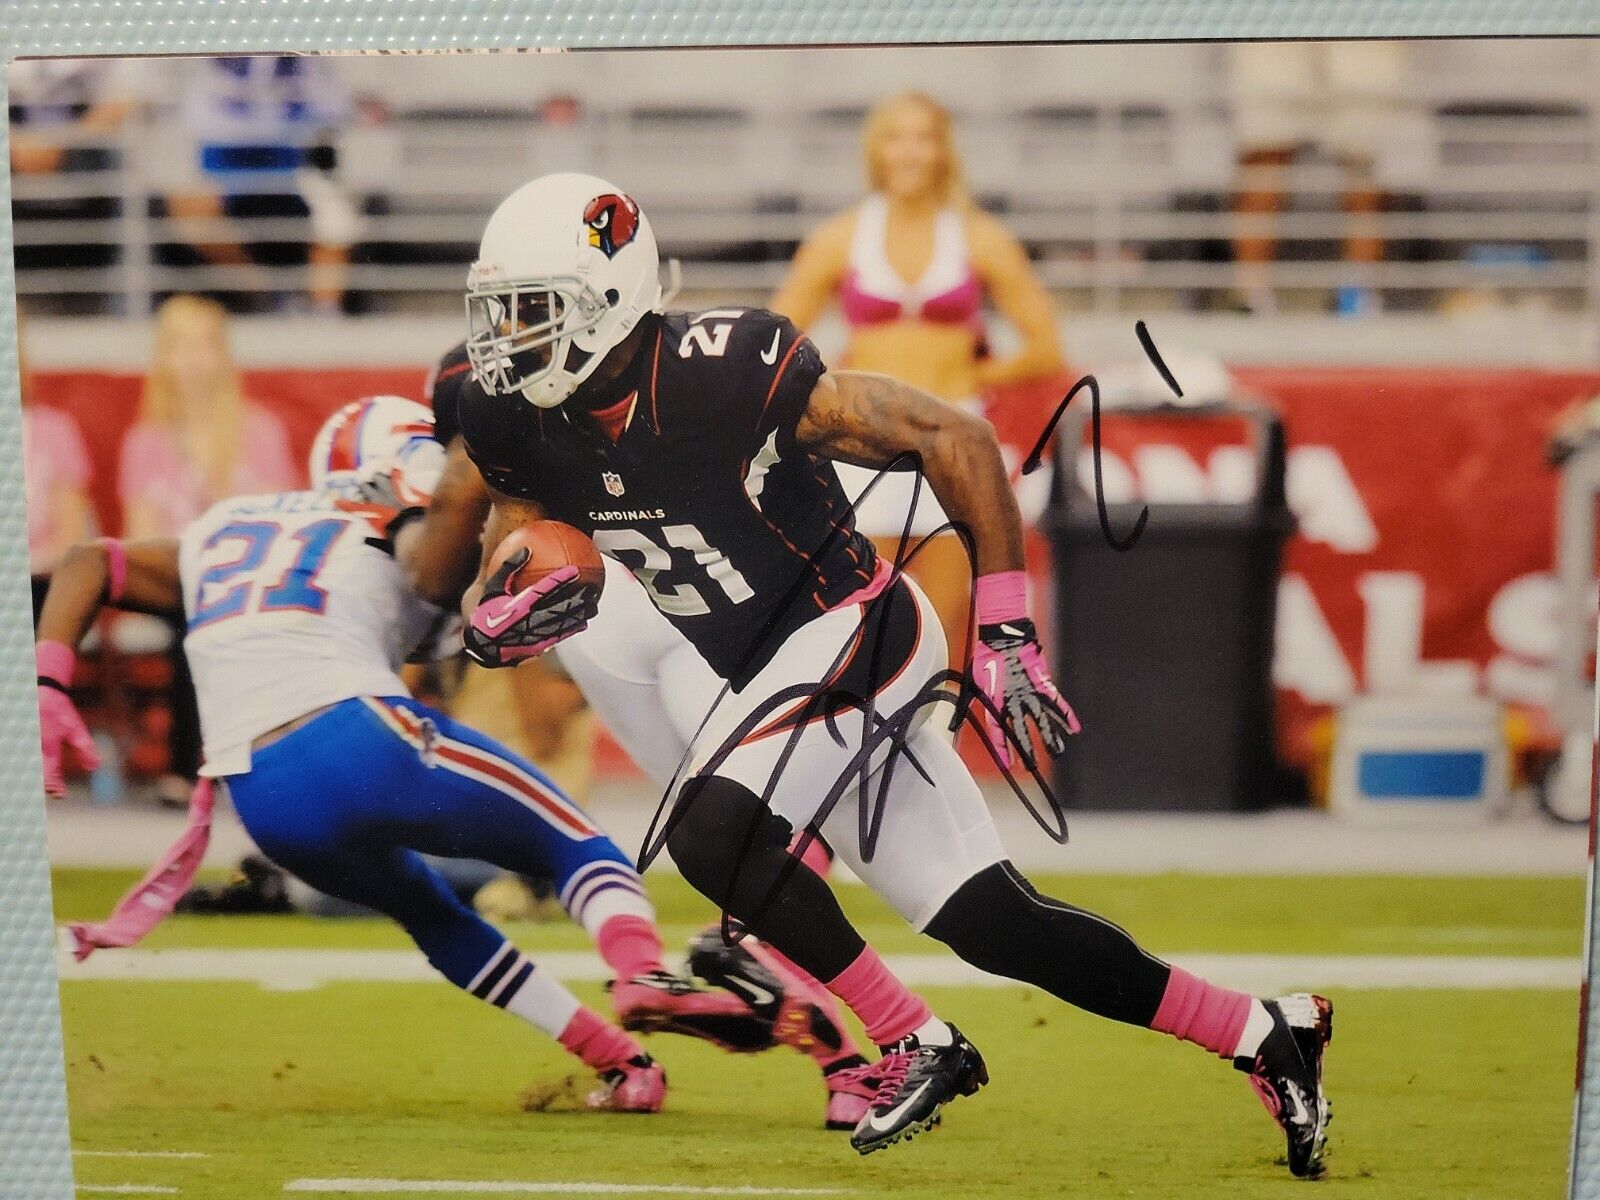 PATRICK PETERSON AUTOGRAPHED SIGNED 8X10 Photo Poster painting PICTURE CARDINALS LSU